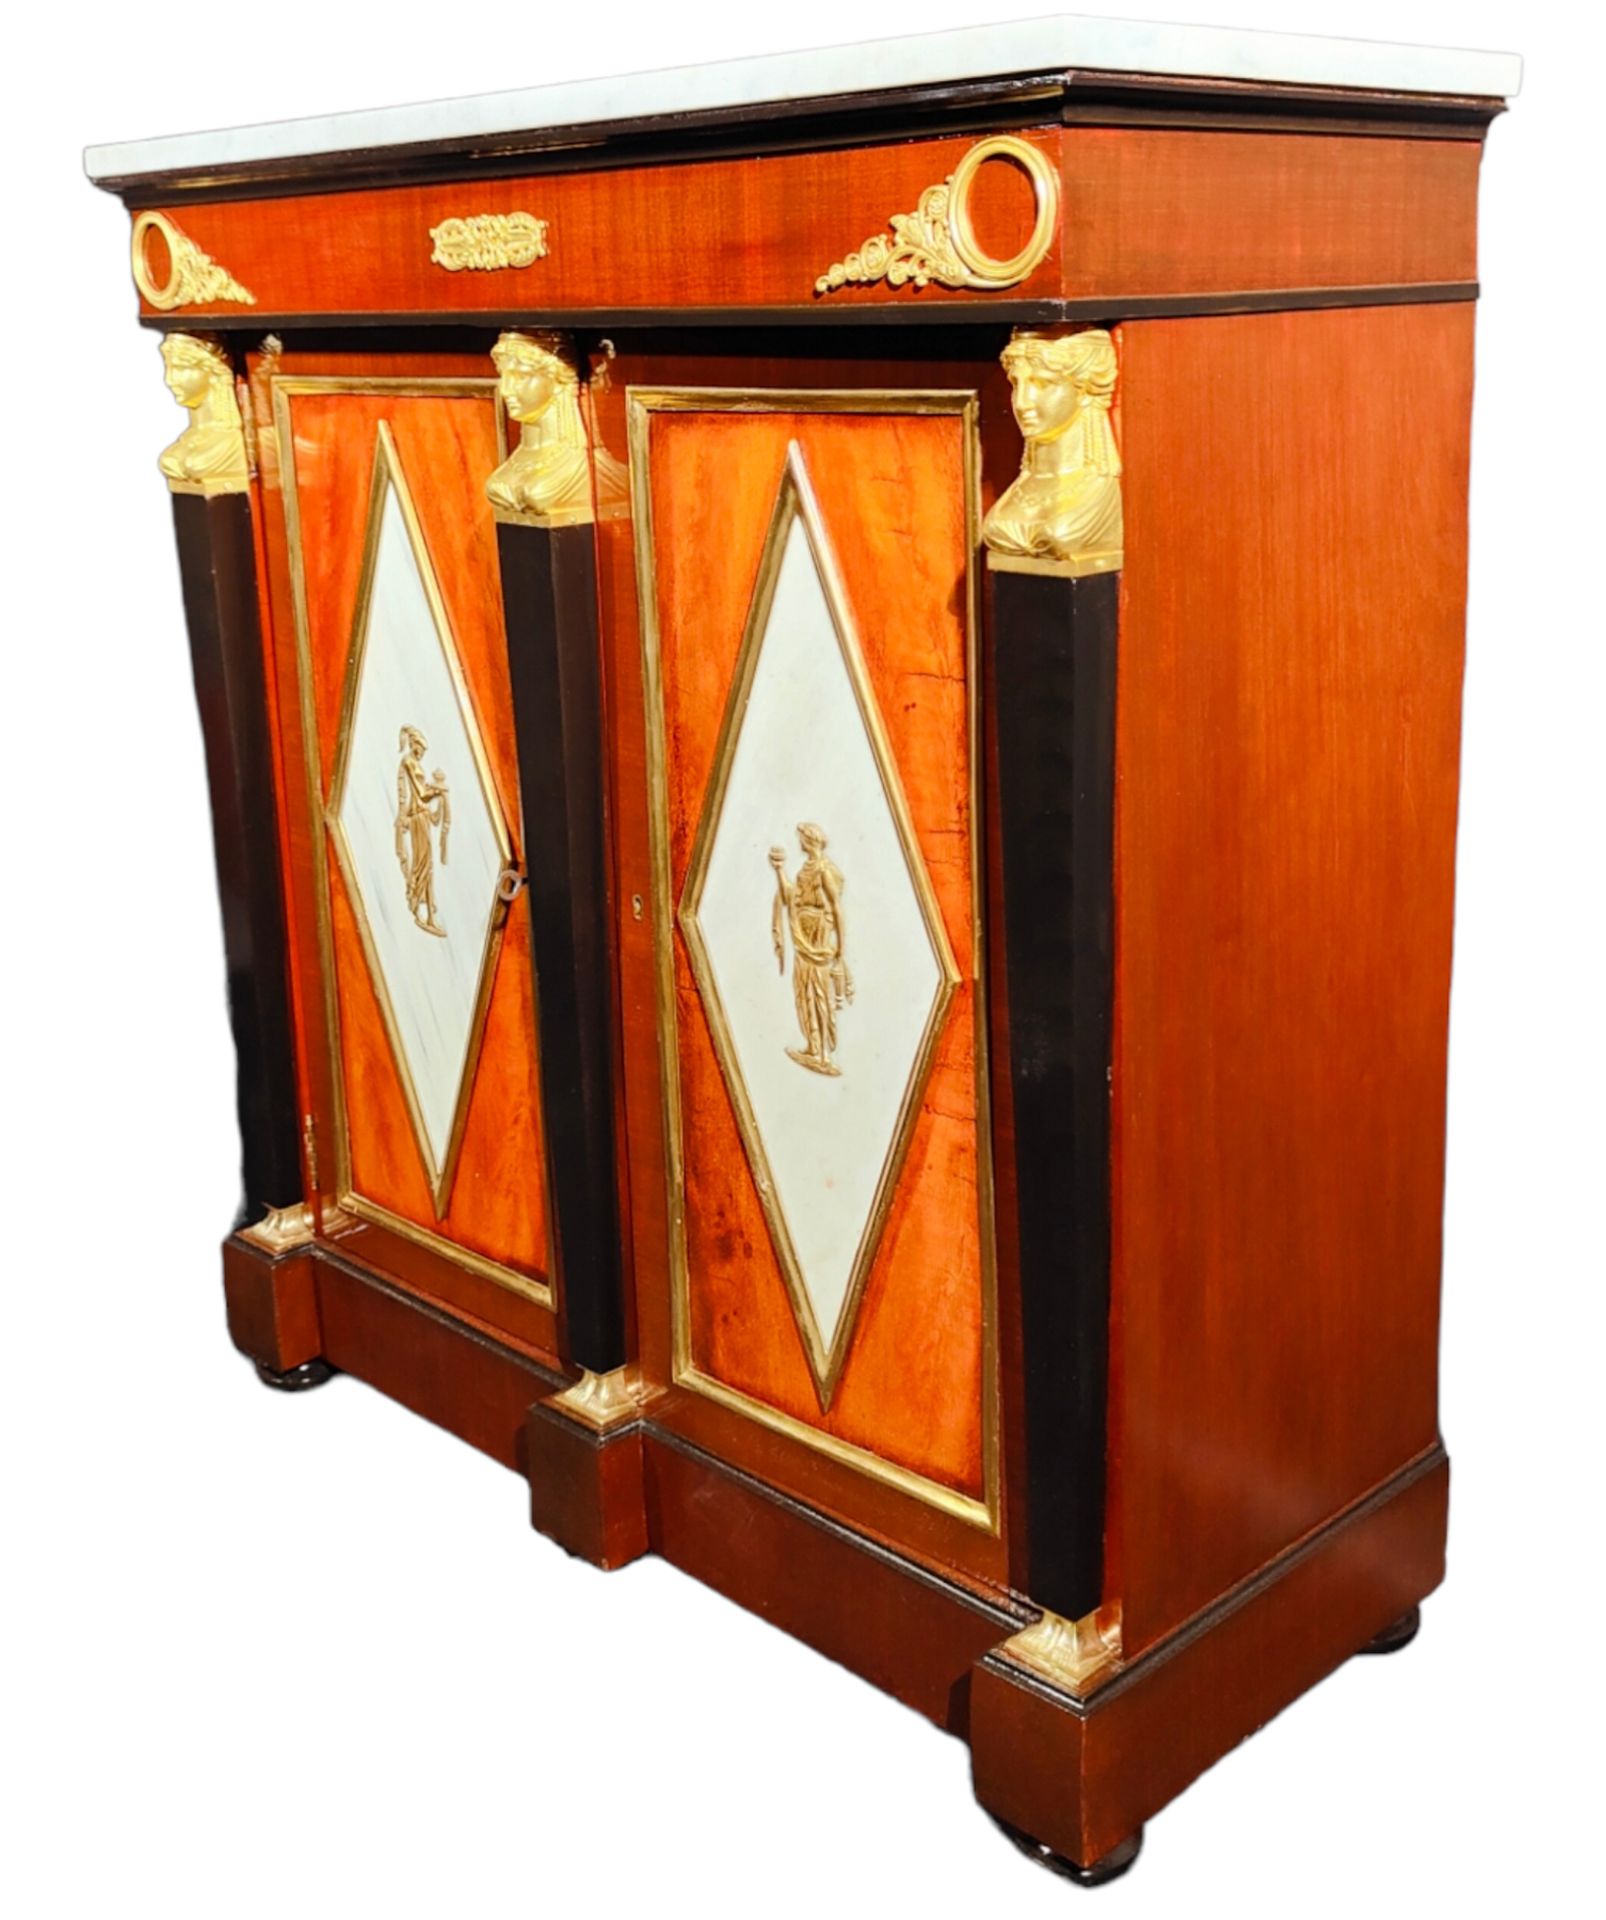 Elegant French Empire style sideboard, 19th century - Image 5 of 8